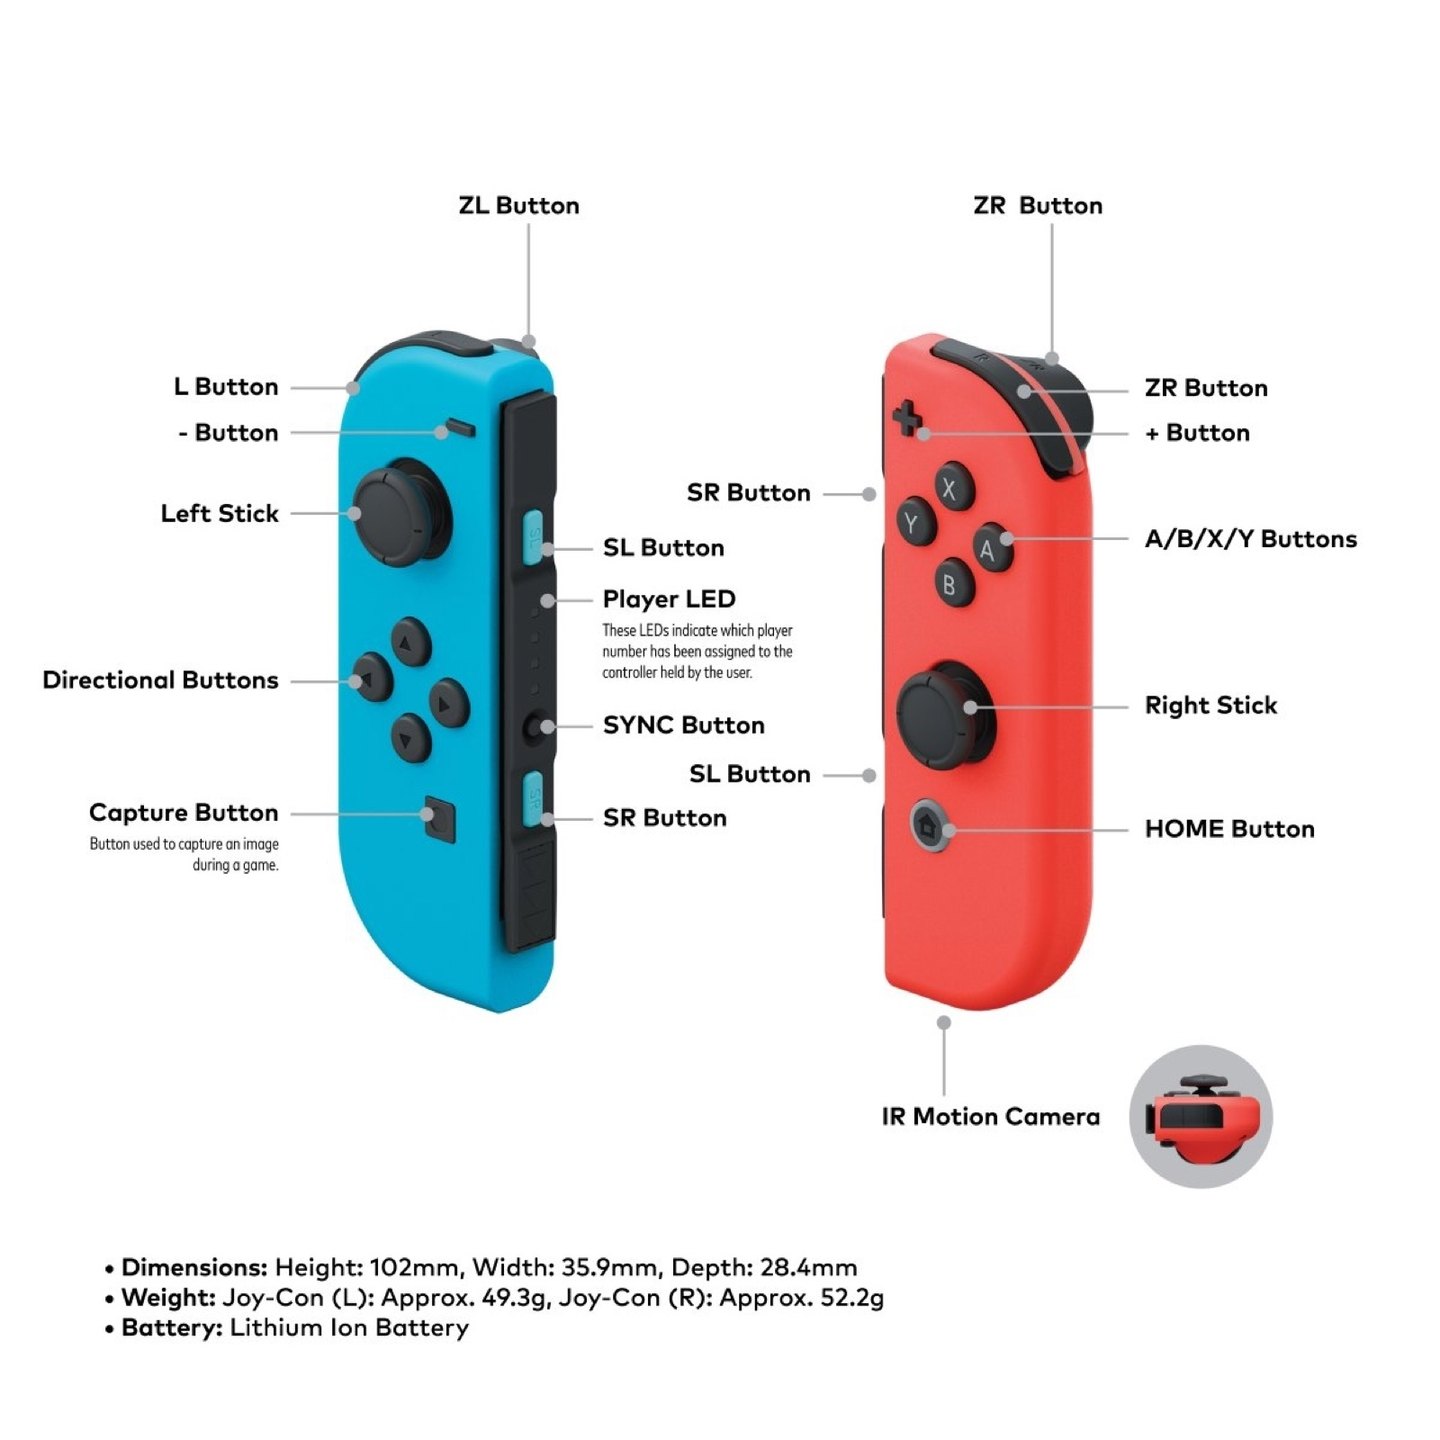 Joy-Con and its buttons